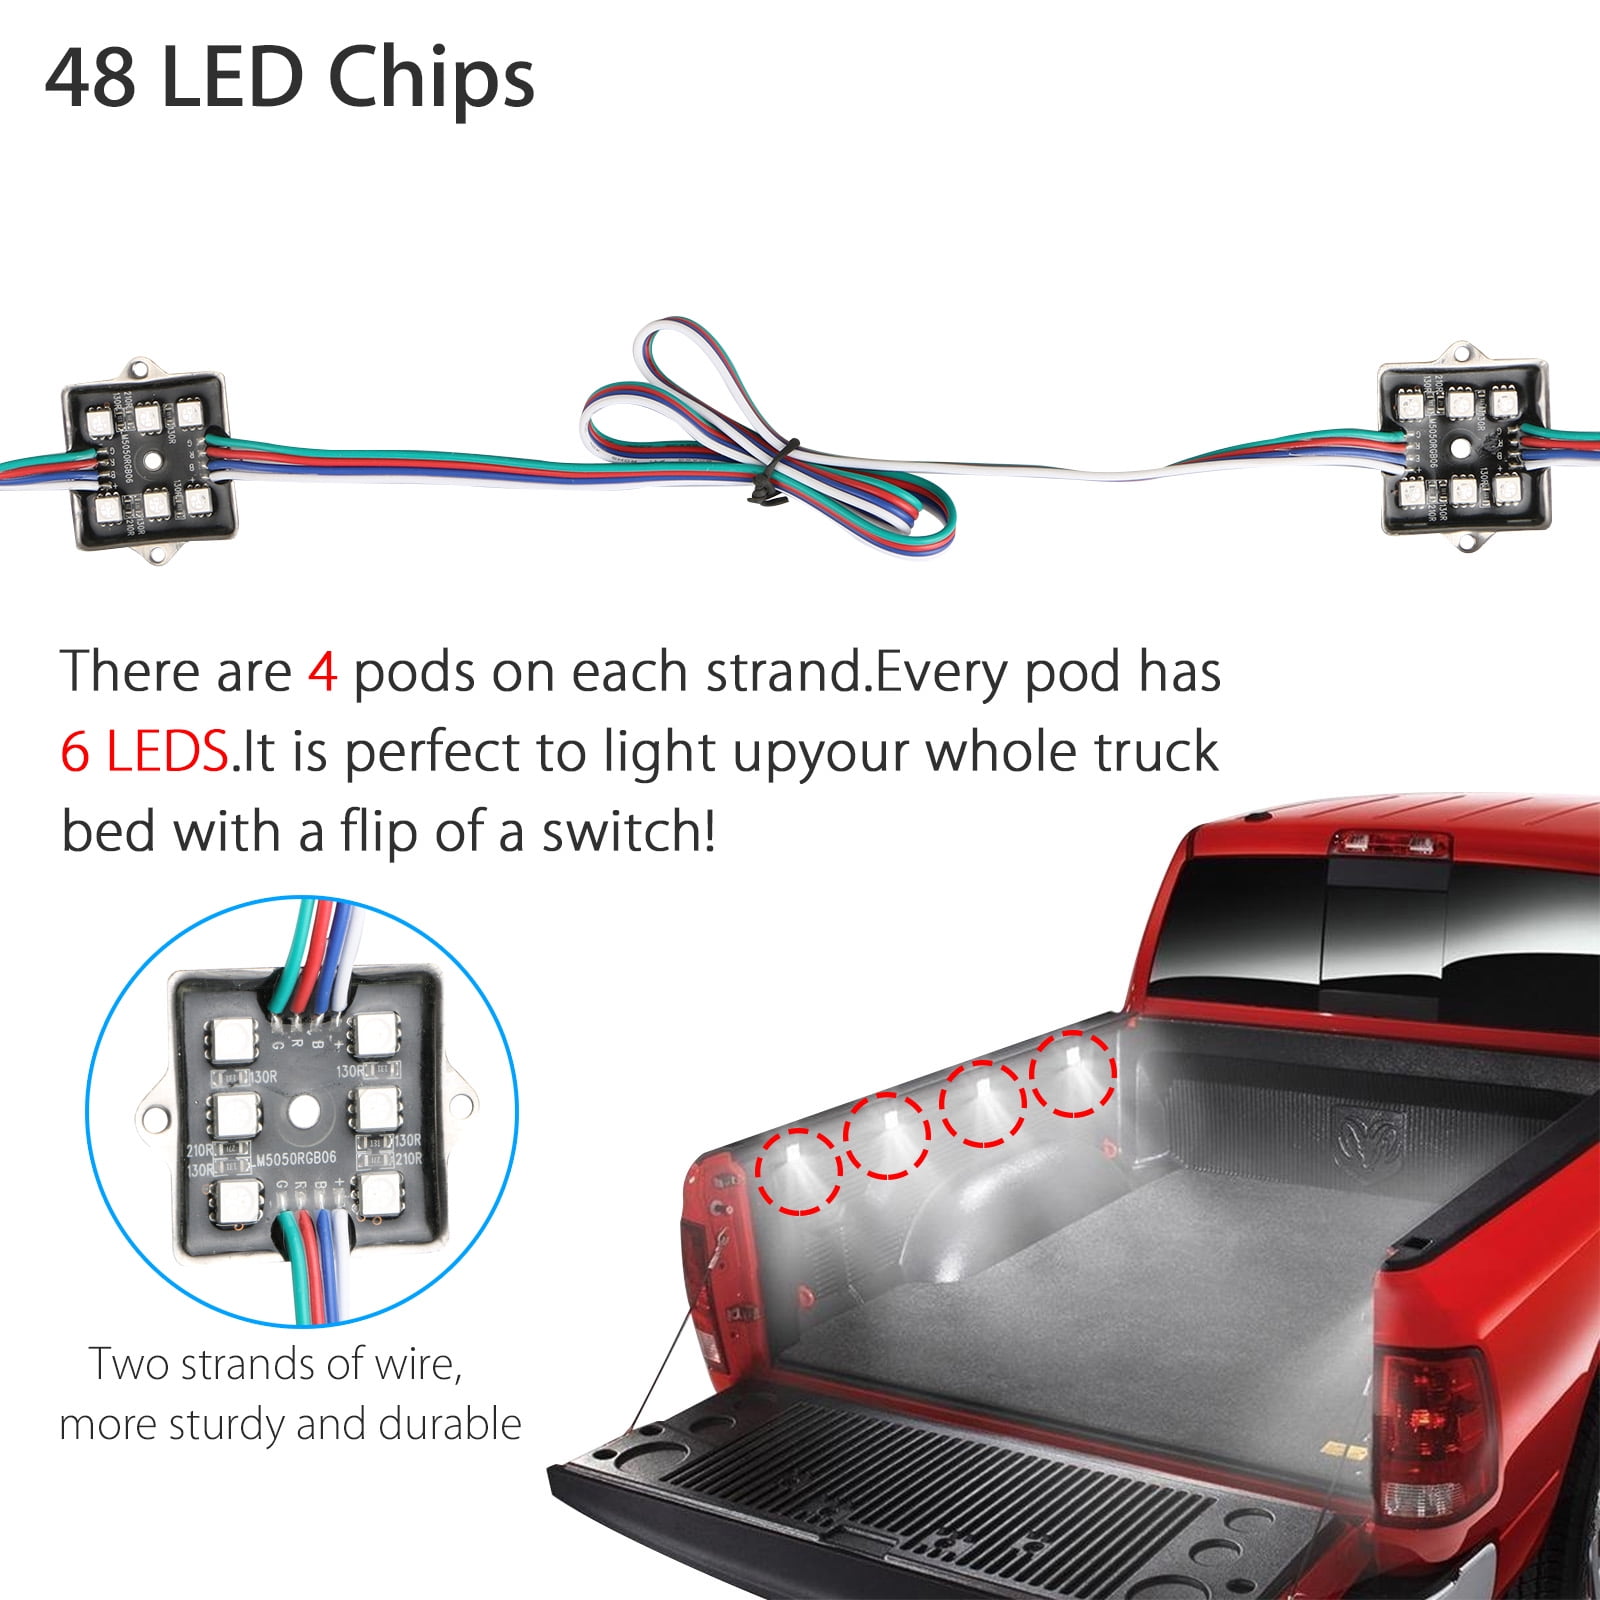 OCPTY 8 pods LED Truck Bed Light Kit Universal RGB Led Rock Light Sound Activated Camera Function Wireless Remote Bluetooth Controller Waterproof for Truck Pickup Cargo Trailer RV Unloading Boats 